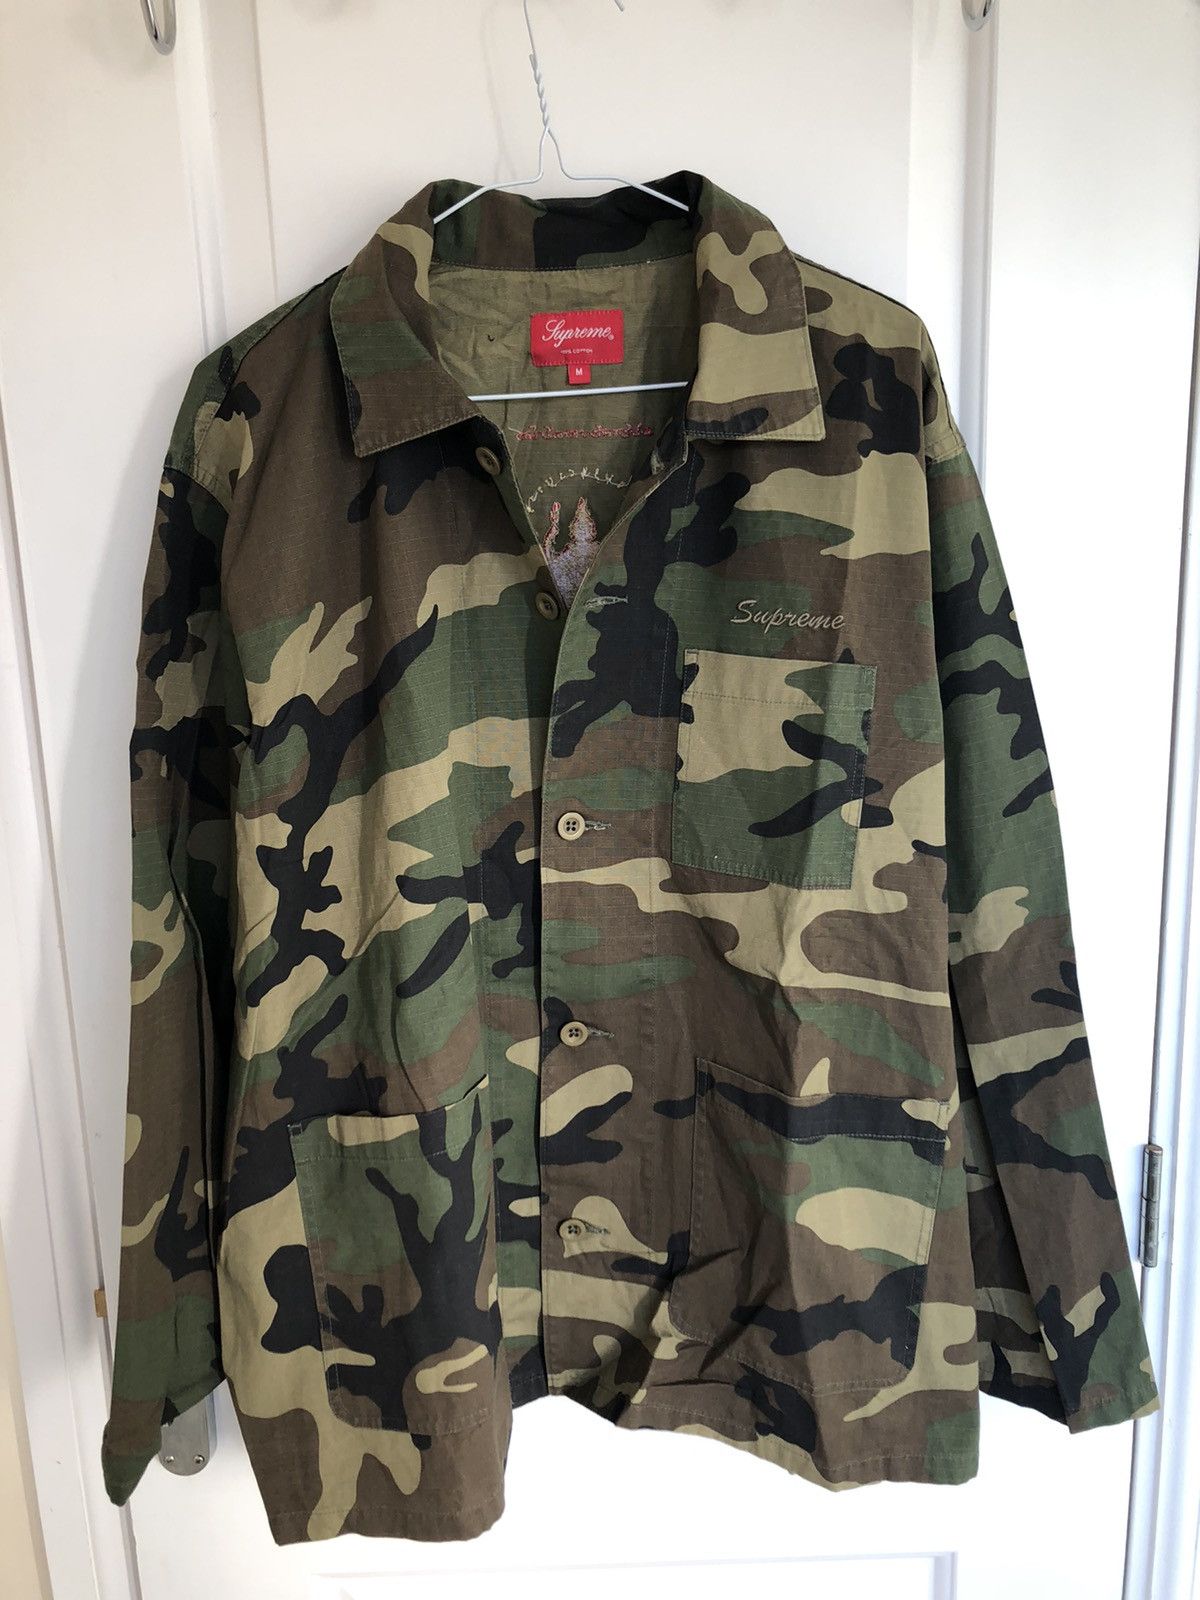 Supreme Supreme blessings ripstop shirt woodland camo- Size M | Grailed